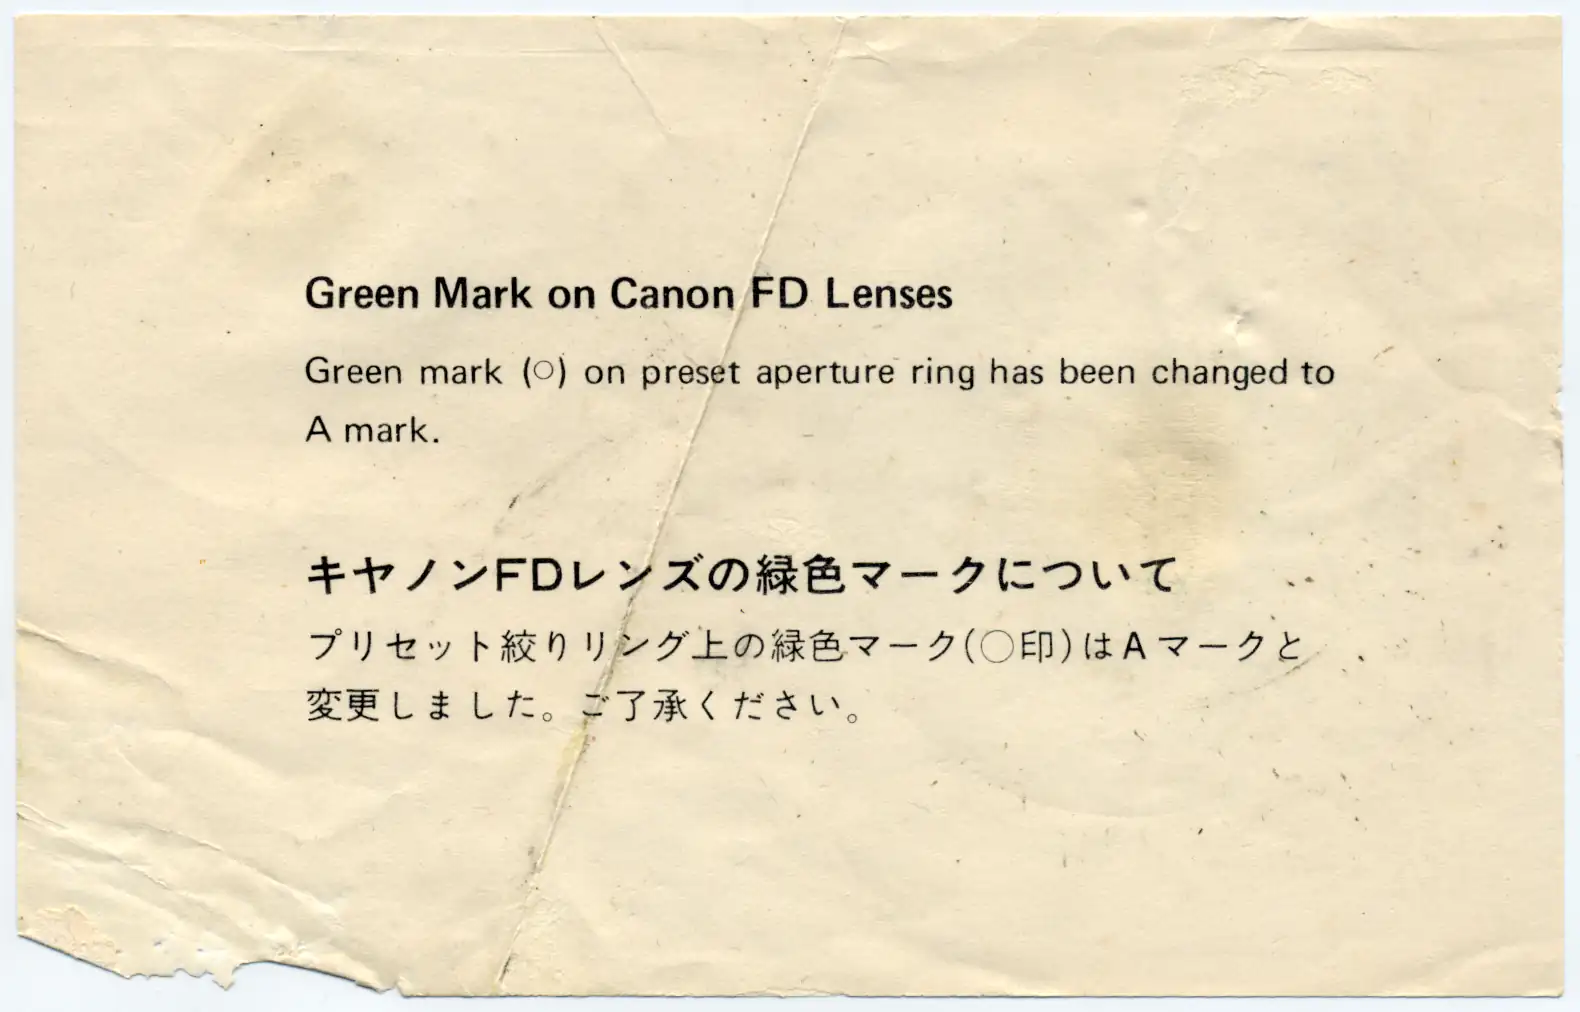 A note found in the camera lens box - from now on the green 'o\' will change to a green 'A'